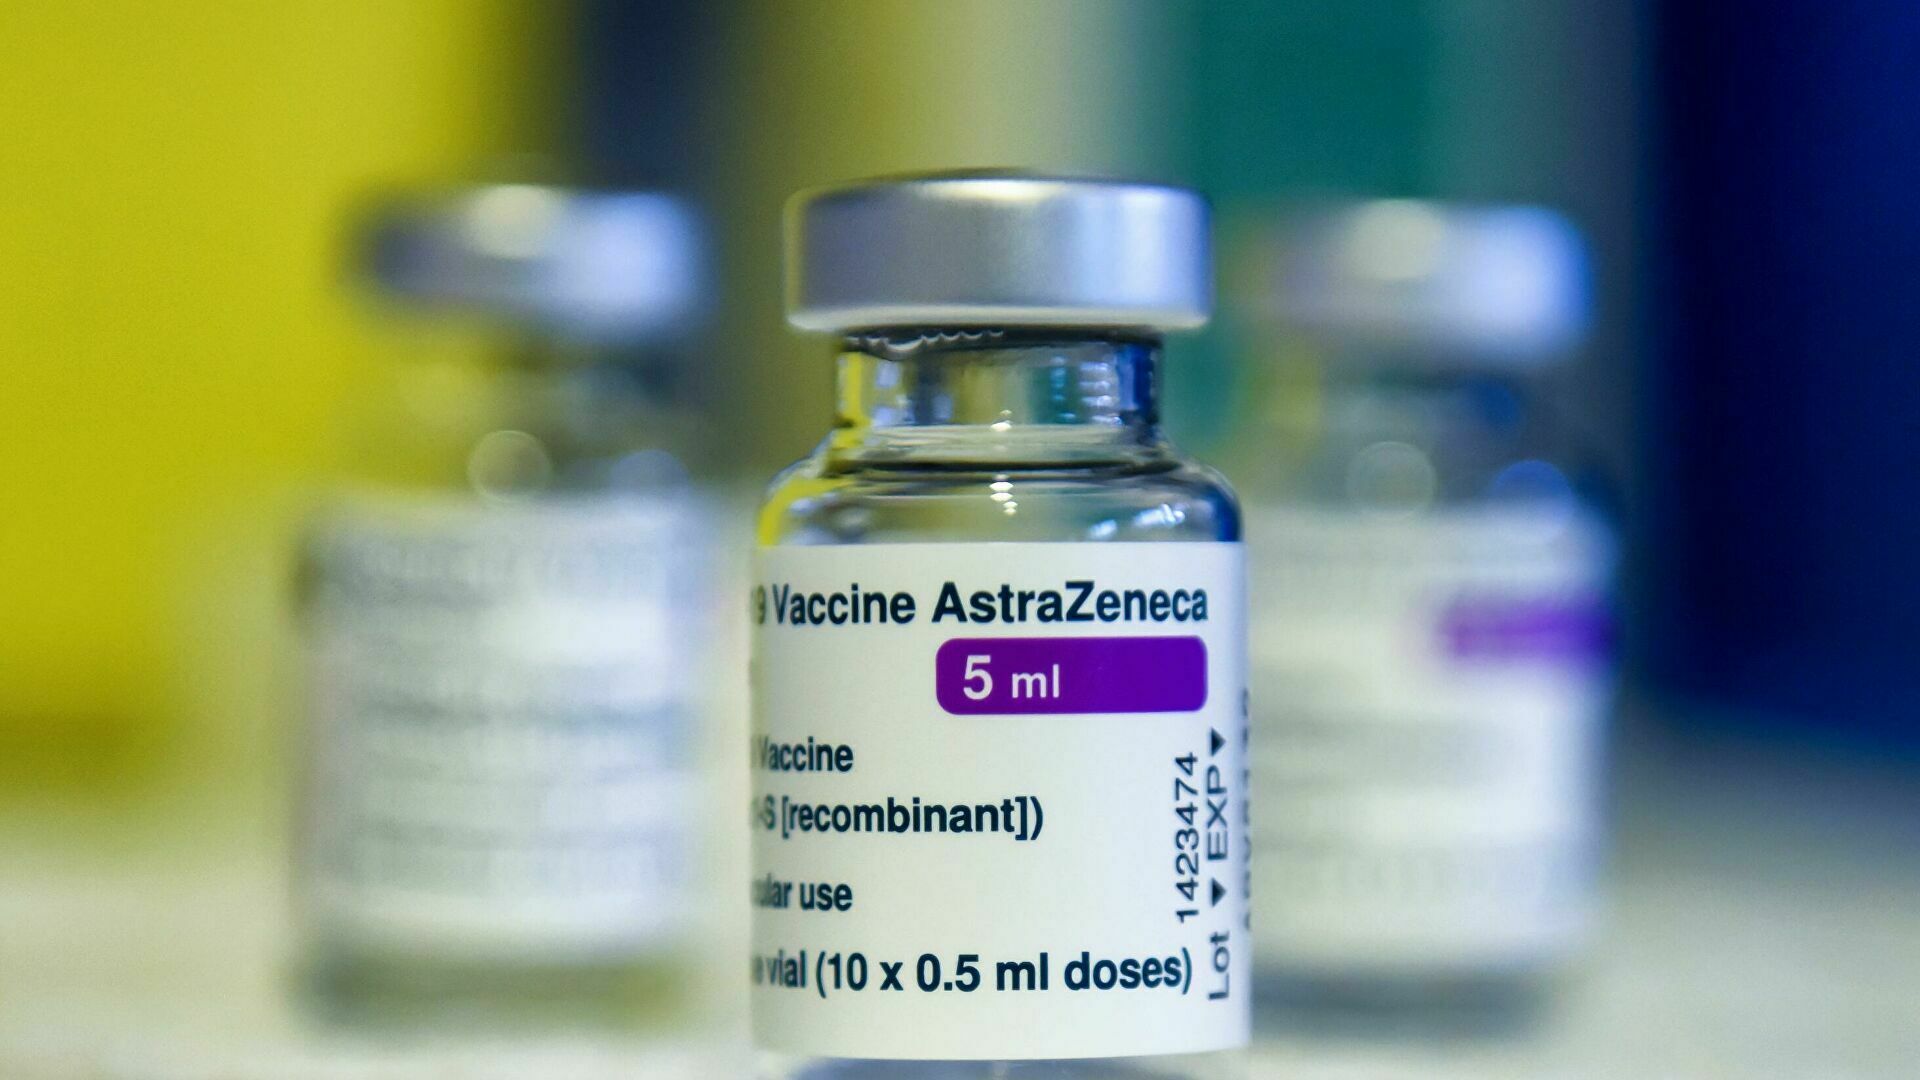 AstraZeneca will apply for registration of vaccine against COVID-19 in Russia